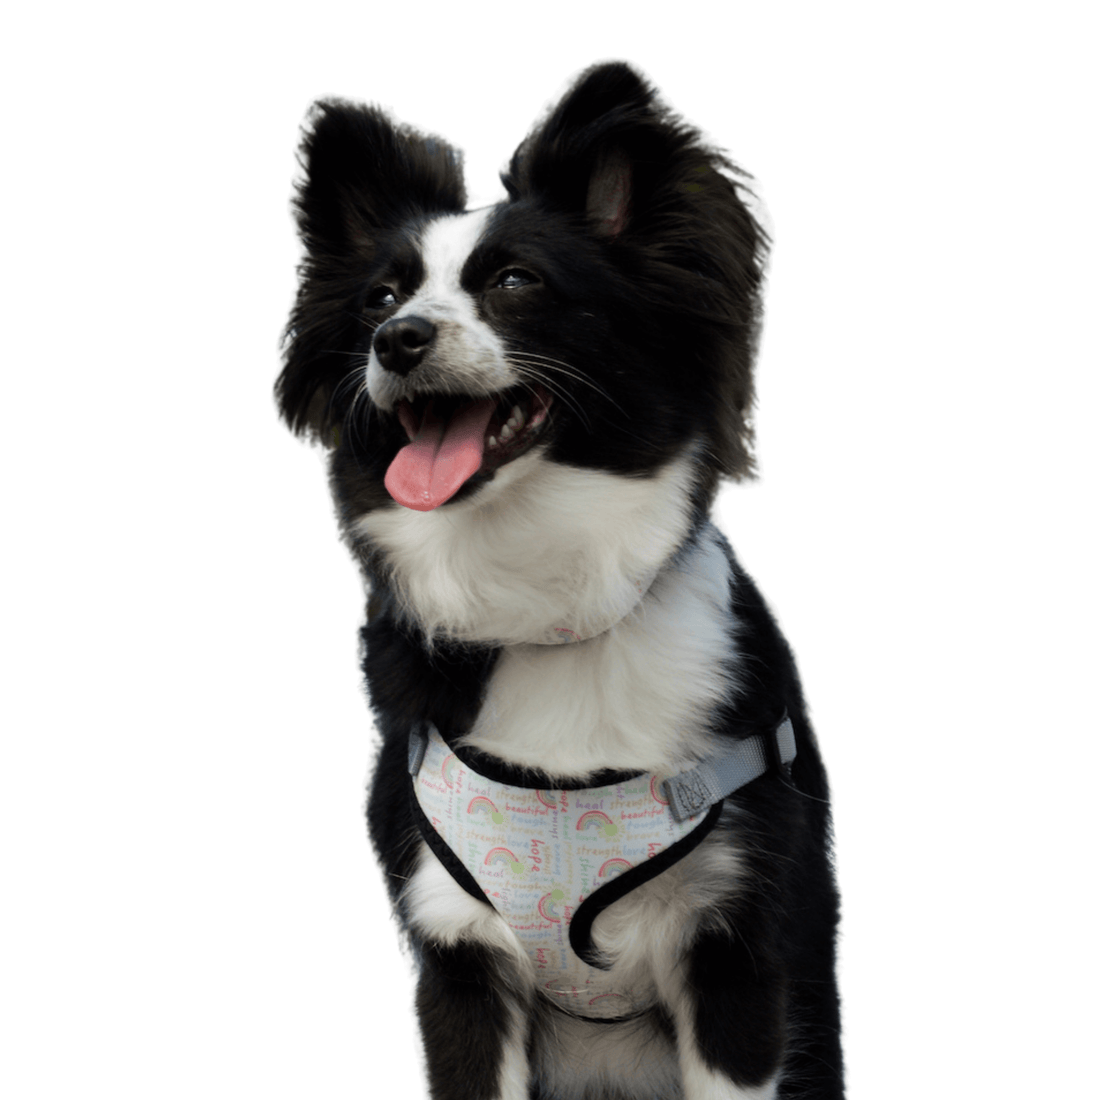 perfect fit positive words pattern dog harness on aussie